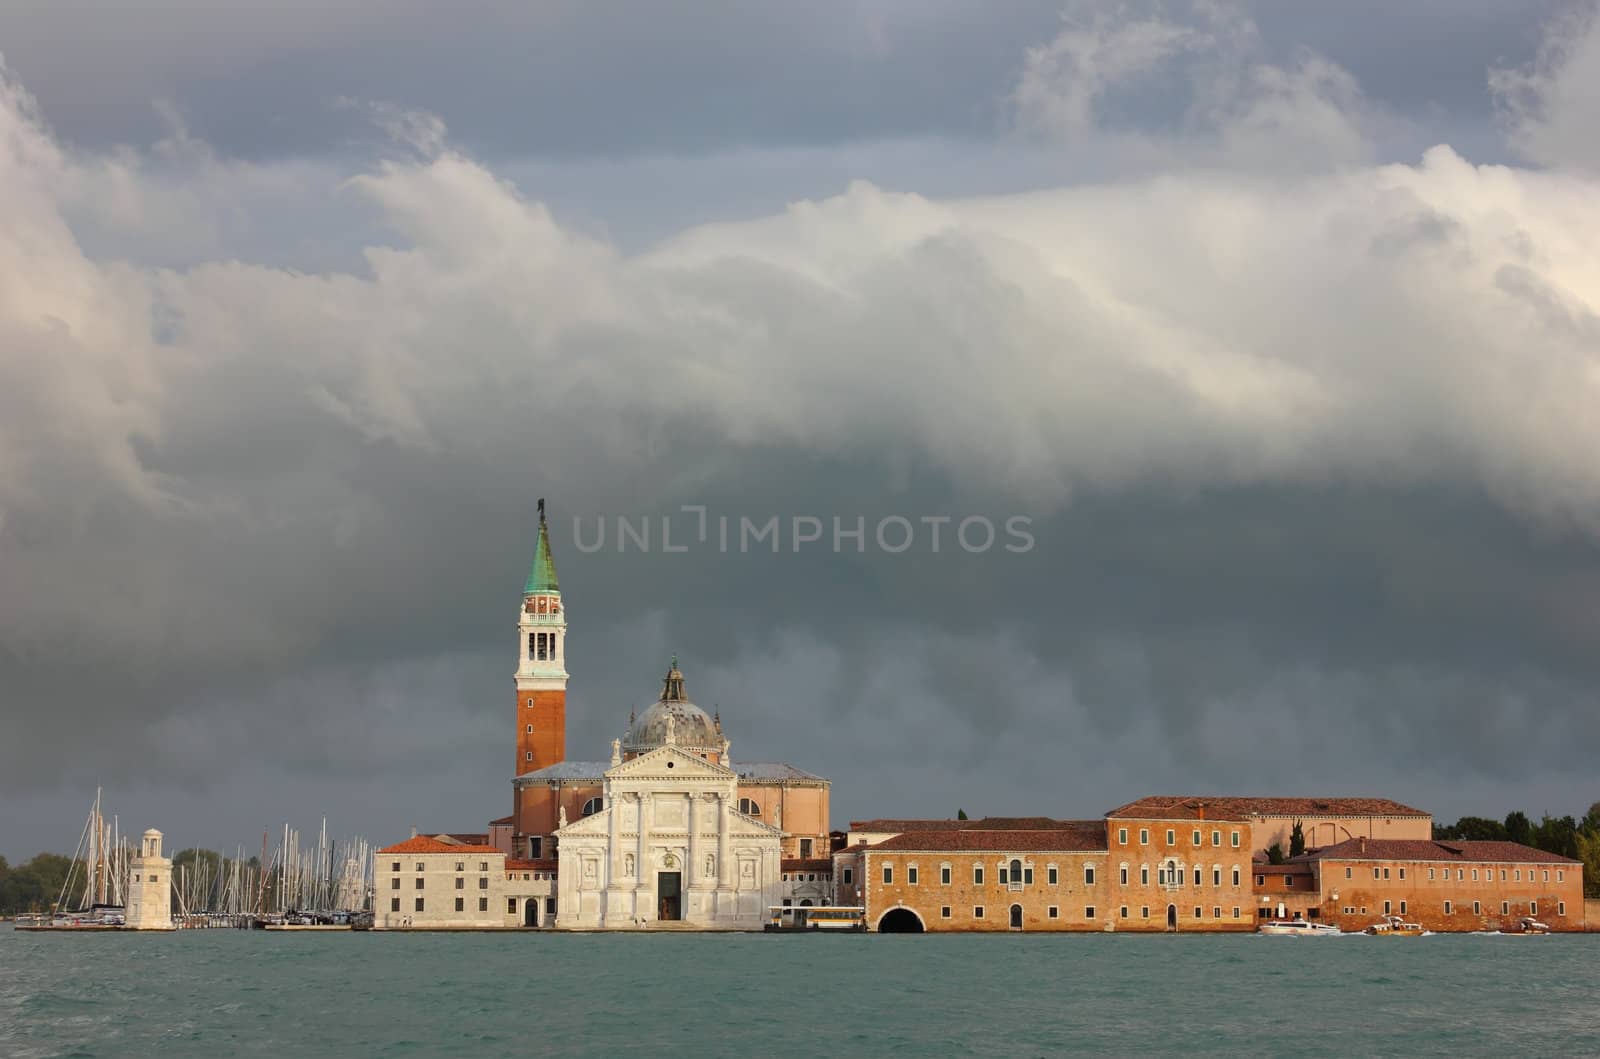 Church of San Giorgio Maggiore in Venice bathing in warm light after the storm.